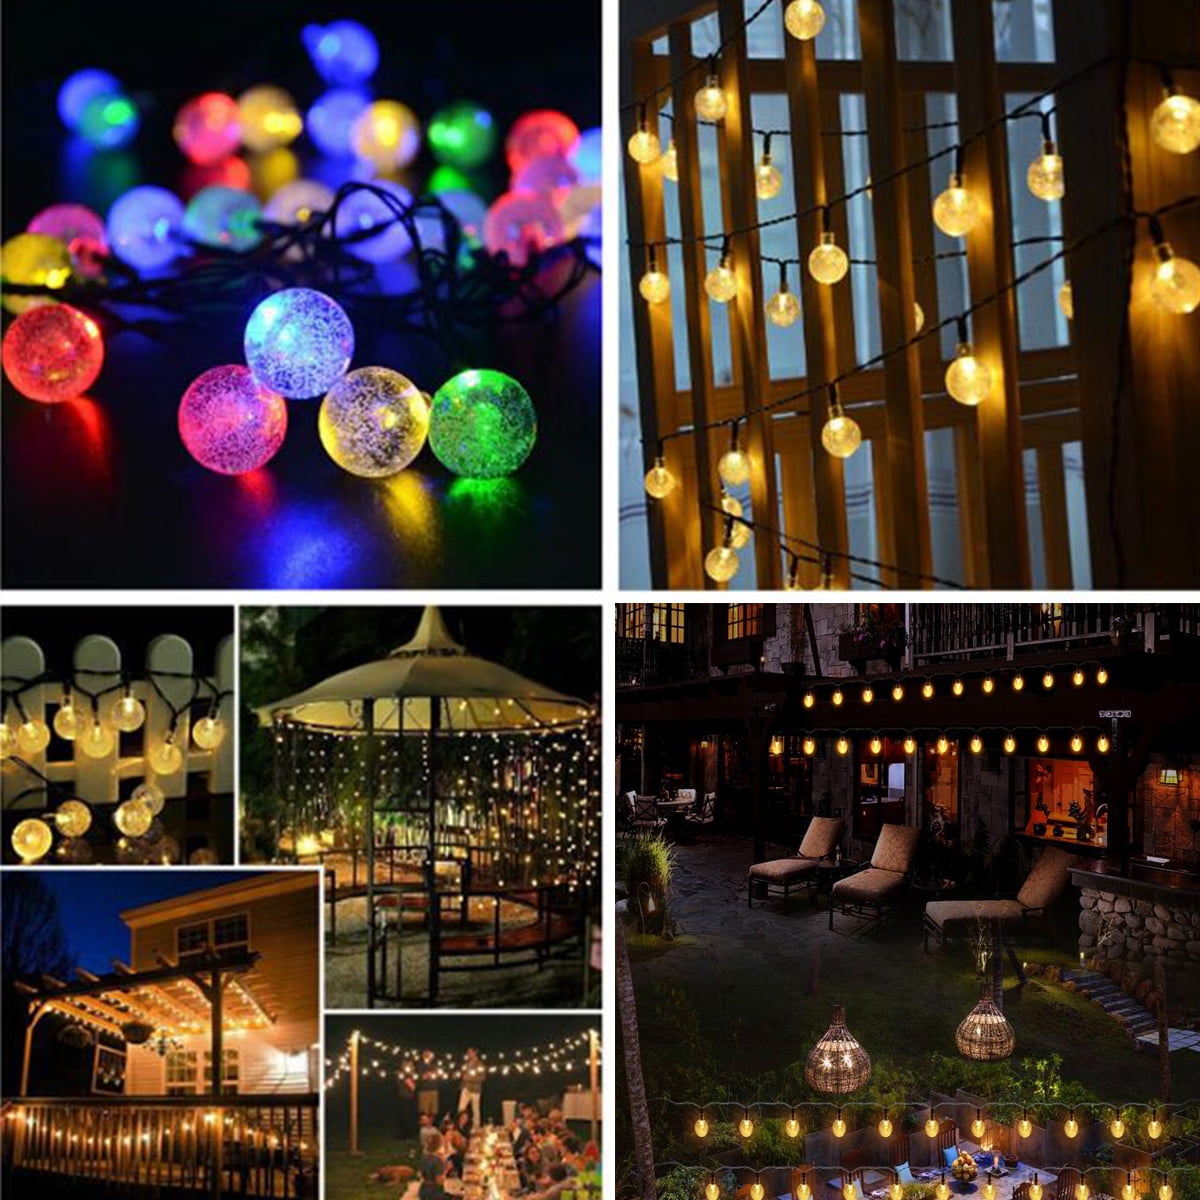 BBQ 21ft 30LEDs Water Drop Decorative Lights for Garden Christmas Tree and Home Ornaments. Camping Solar String Lights Party T-SUN Solar Powered Outdoor Garden Fairy Lights